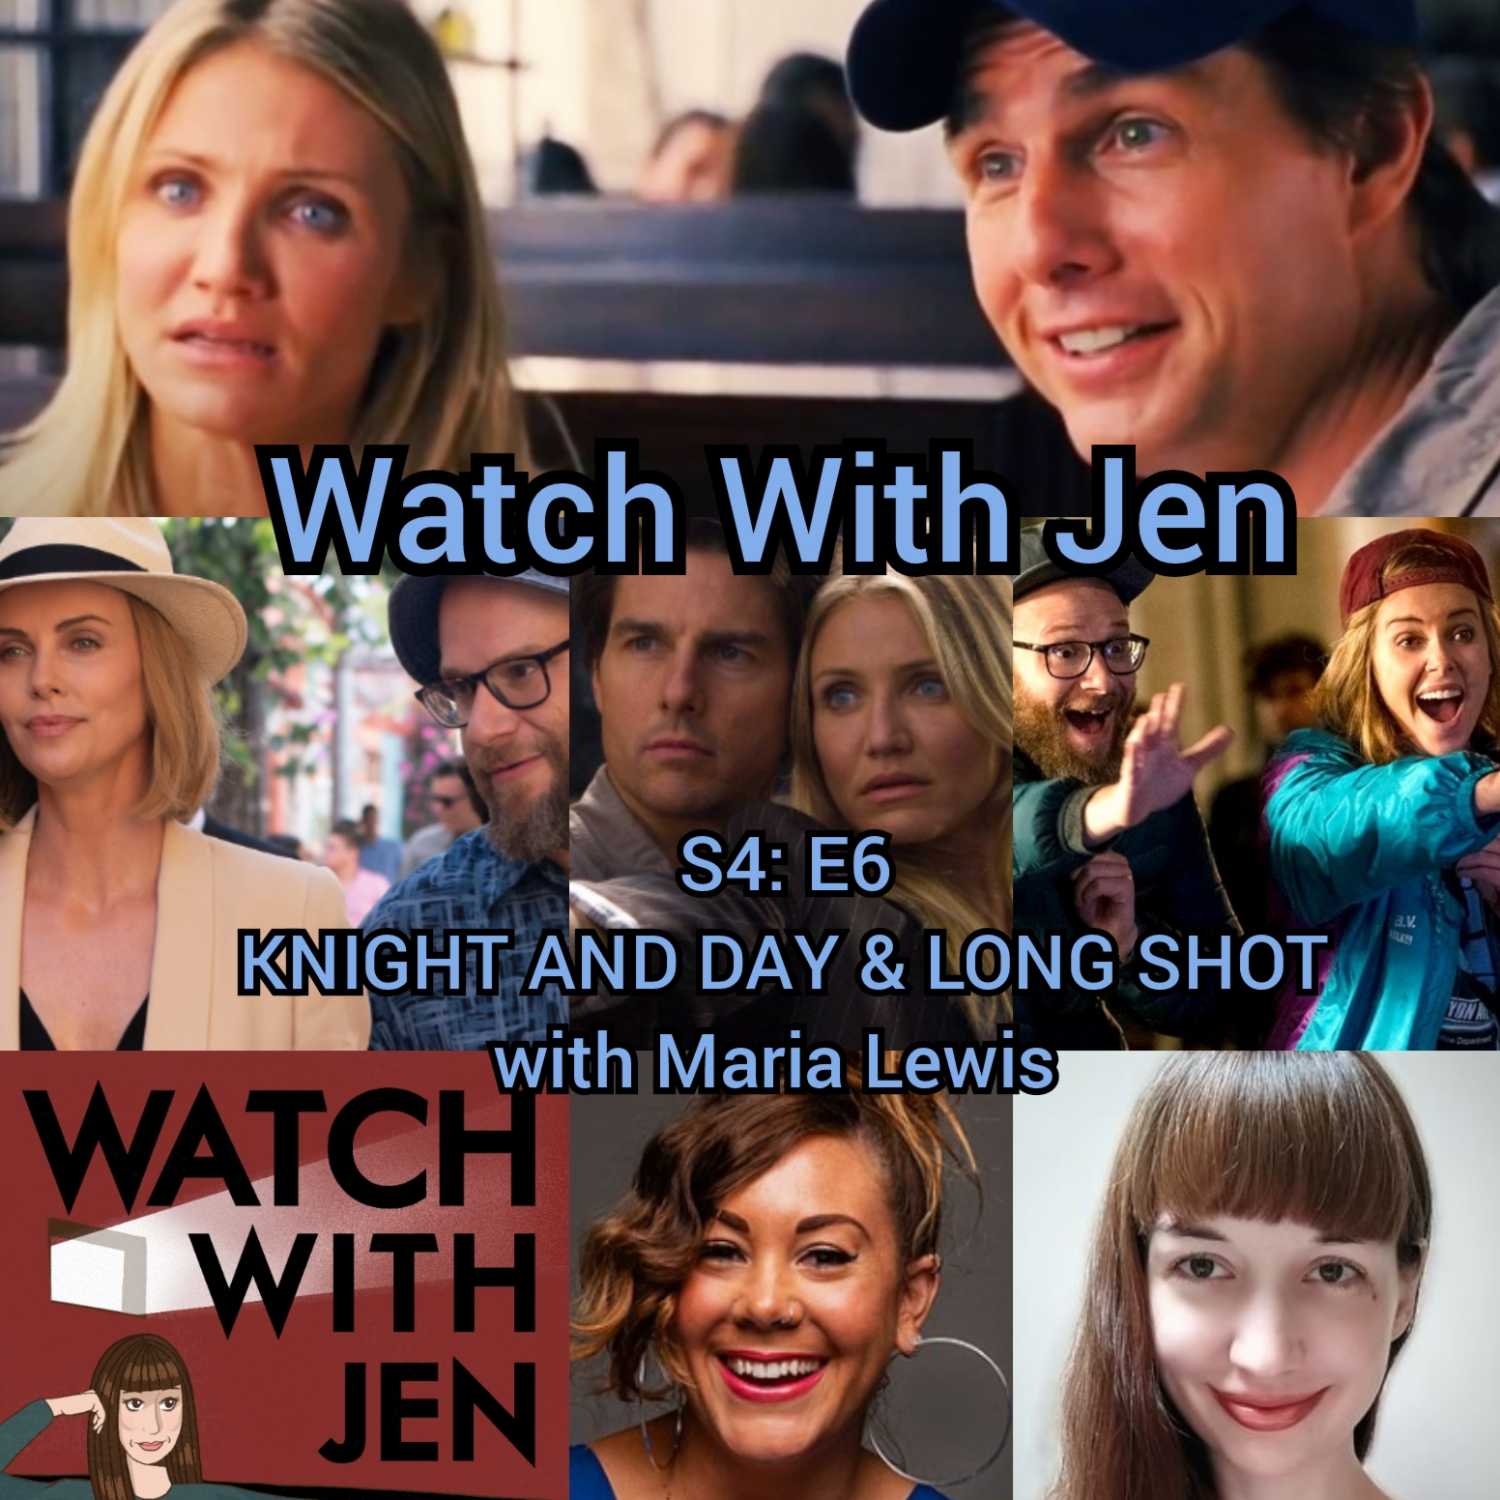 Watch With Jen - S4: E6 - KNIGHT AND DAY & LONG SHOT with Maria Lewis